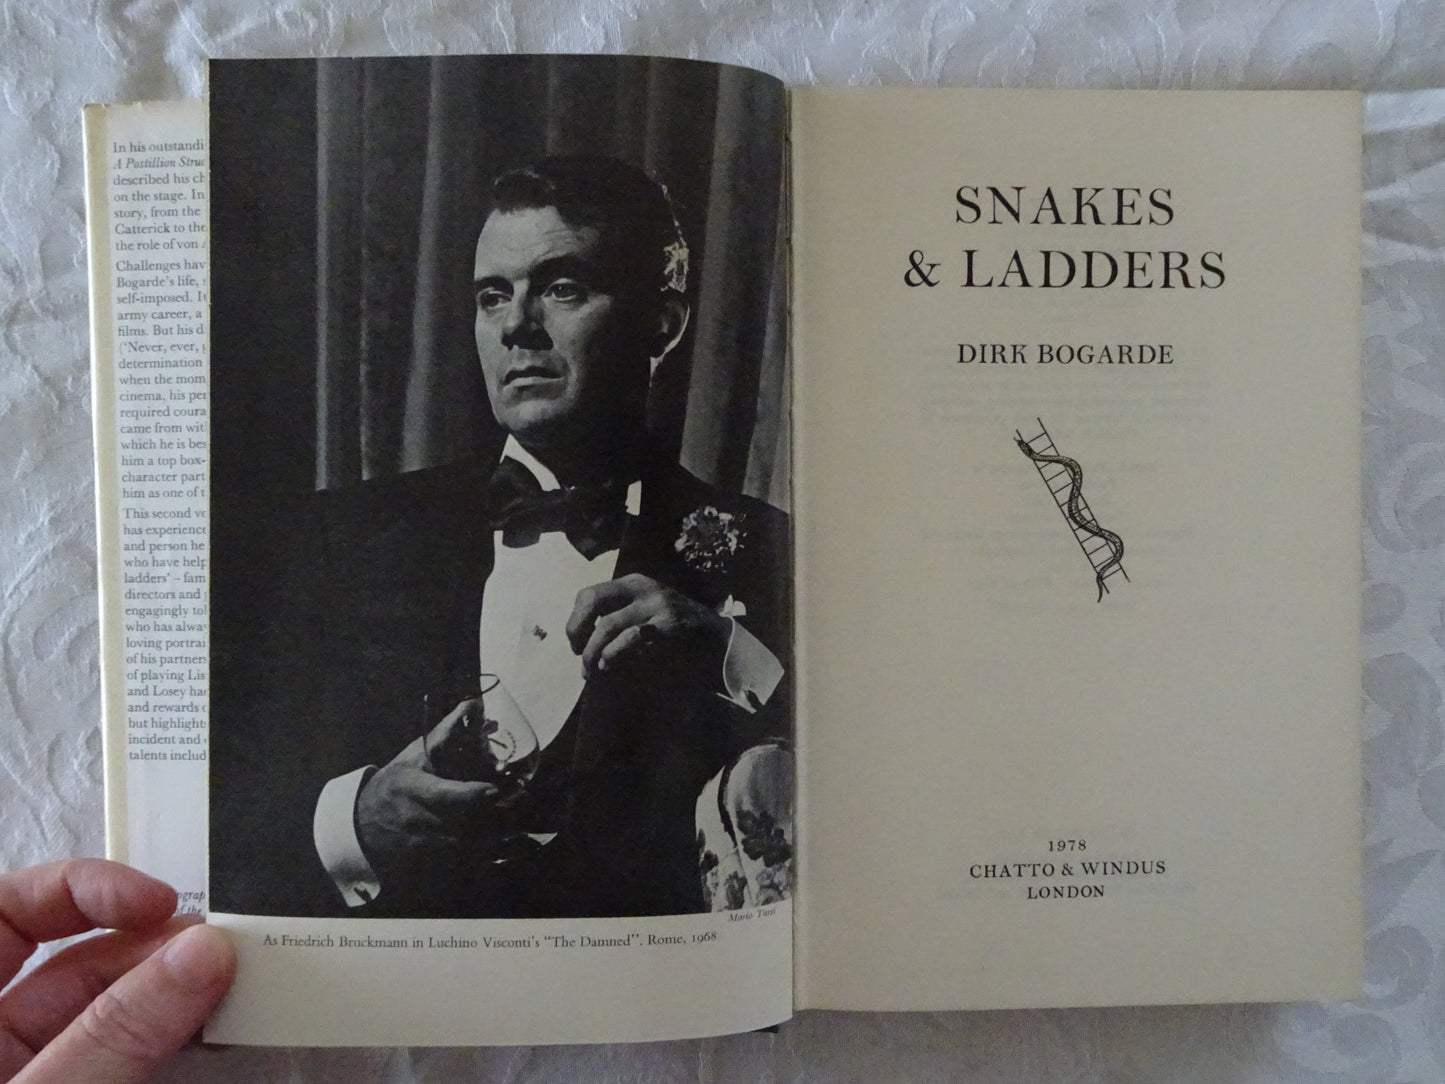 Snakes and Ladders by Dirk Bogarde